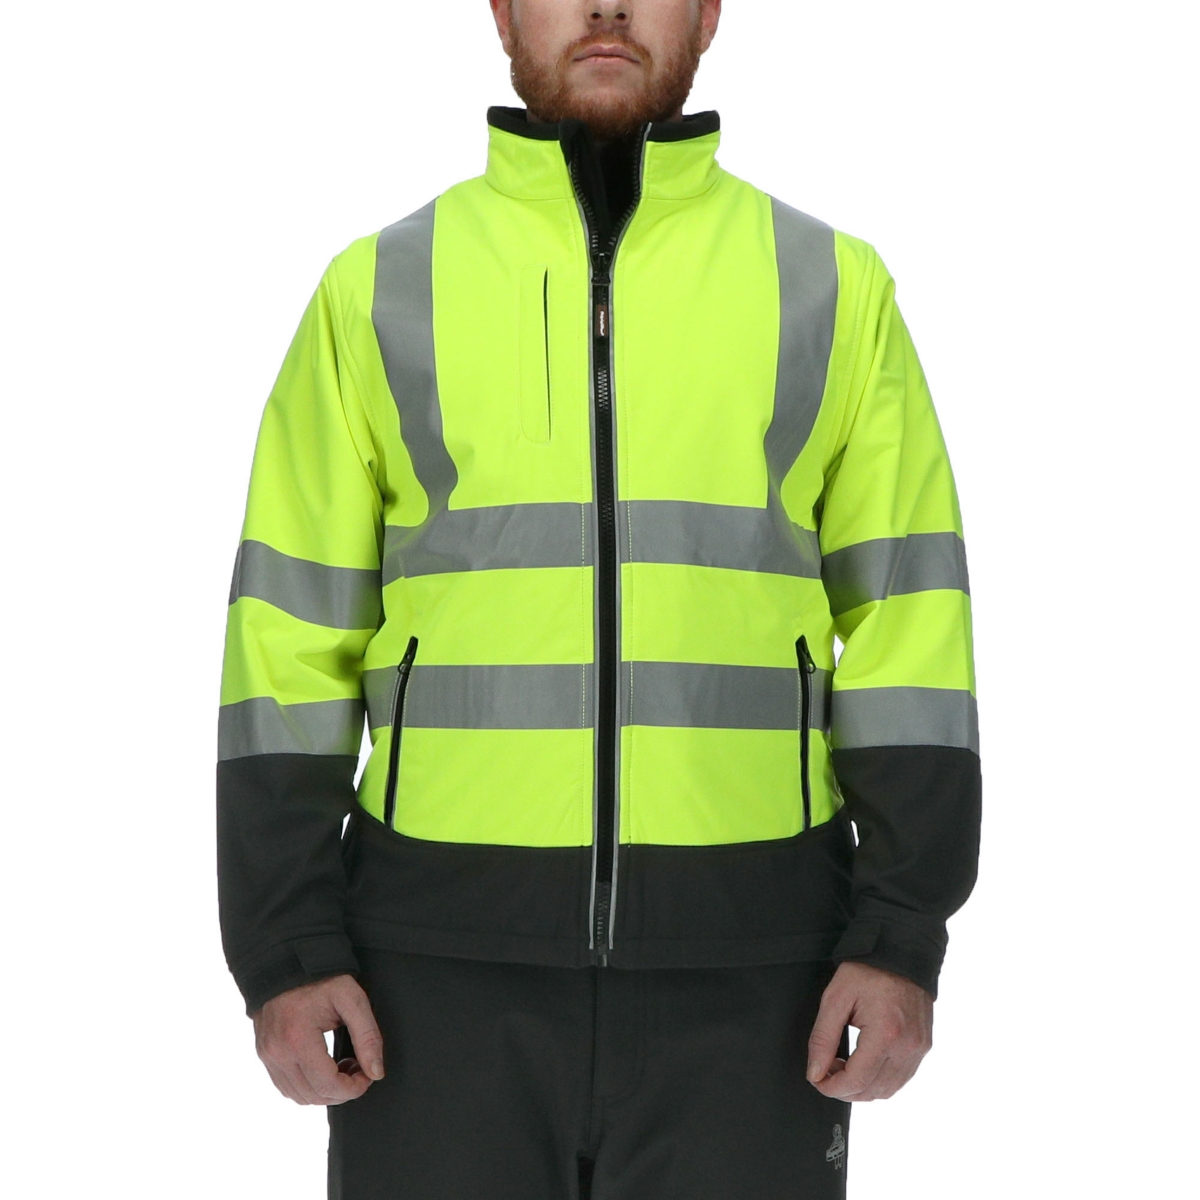 Men's High Visibility Softshell Safety Jacket with Reflective Tape - Lime